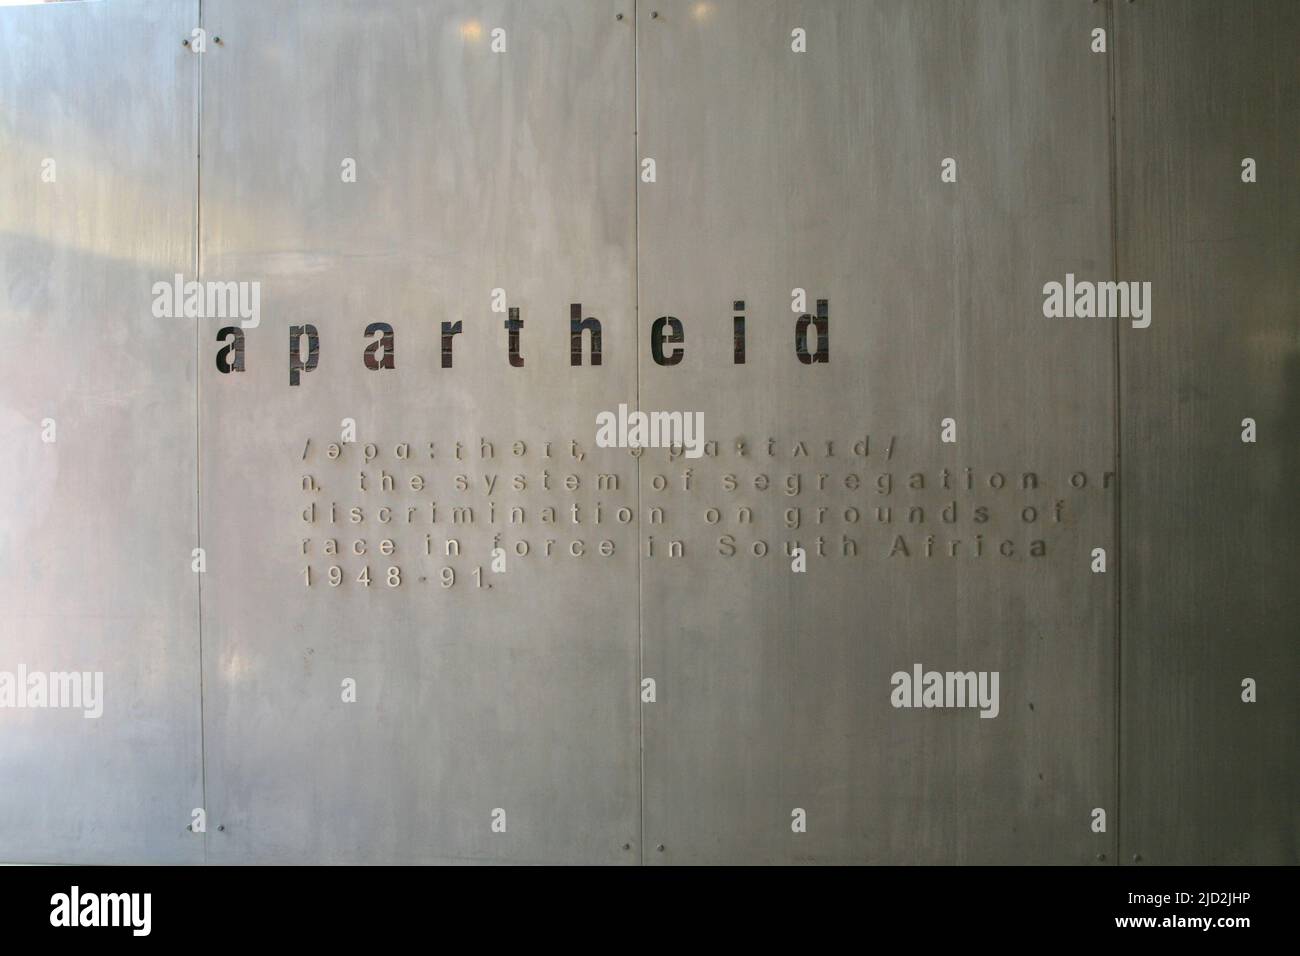 Definition of apartheid on wall in the exhibit at the Apartheid Museum, Johannesburg, Gauteng, South Africa. Stock Photo